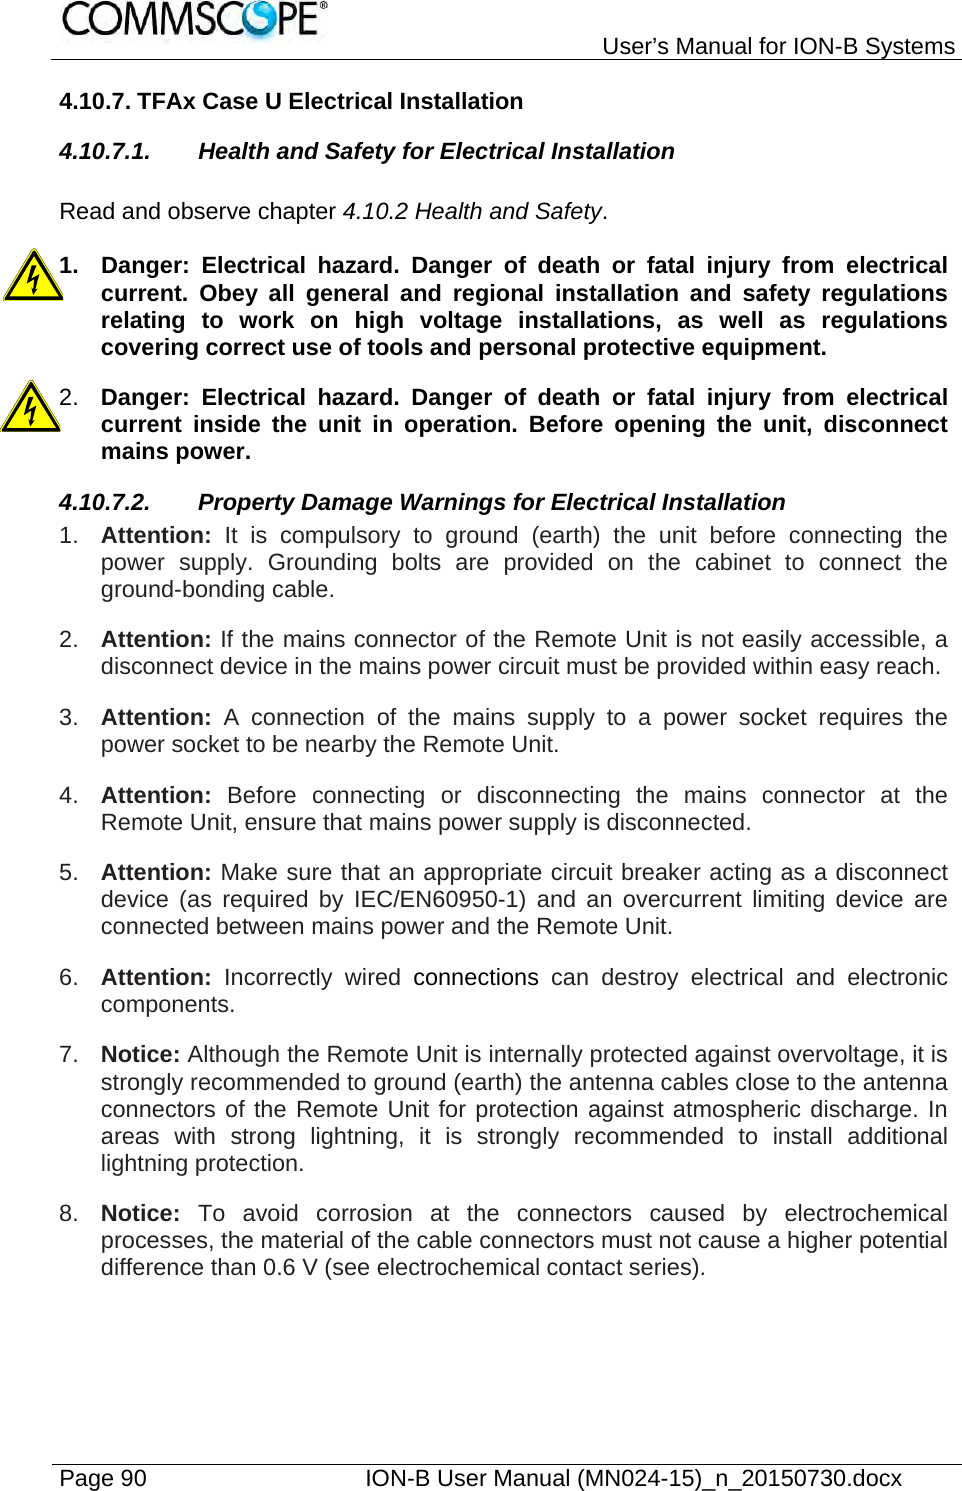   User’s Manual for ION-B Systems Page 90    ION-B User Manual (MN024-15)_n_20150730.docx  4.10.7. TFAx Case U Electrical Installation 4.10.7.1. Health and Safety for Electrical Installation  Read and observe chapter 4.10.2 Health and Safety.  1.  Danger: Electrical hazard. Danger of death or fatal injury from electrical current. Obey all general and regional installation and safety regulations relating to work on high voltage installations, as well as regulations covering correct use of tools and personal protective equipment. 2.  Danger: Electrical hazard. Danger of death or fatal injury from electrical current inside the unit in operation. Before opening the unit, disconnect mains power. 4.10.7.2.  Property Damage Warnings for Electrical Installation 1.  Attention: It is compulsory to ground (earth) the unit before connecting the power supply. Grounding bolts are provided on the cabinet to connect the ground-bonding cable. 2.  Attention: If the mains connector of the Remote Unit is not easily accessible, a disconnect device in the mains power circuit must be provided within easy reach. 3.  Attention: A connection of the mains supply to a power socket requires the power socket to be nearby the Remote Unit. 4.  Attention:  Before connecting or disconnecting the mains connector at the Remote Unit, ensure that mains power supply is disconnected. 5.  Attention: Make sure that an appropriate circuit breaker acting as a disconnect device (as required by IEC/EN60950-1) and an overcurrent limiting device are connected between mains power and the Remote Unit. 6.  Attention: Incorrectly wired connections can destroy electrical and electronic components.  7.  Notice: Although the Remote Unit is internally protected against overvoltage, it is strongly recommended to ground (earth) the antenna cables close to the antenna connectors of the Remote Unit for protection against atmospheric discharge. In areas with strong lightning, it is strongly recommended to install additional lightning protection. 8.  Notice: To avoid corrosion at the connectors caused by electrochemical processes, the material of the cable connectors must not cause a higher potential difference than 0.6 V (see electrochemical contact series). 